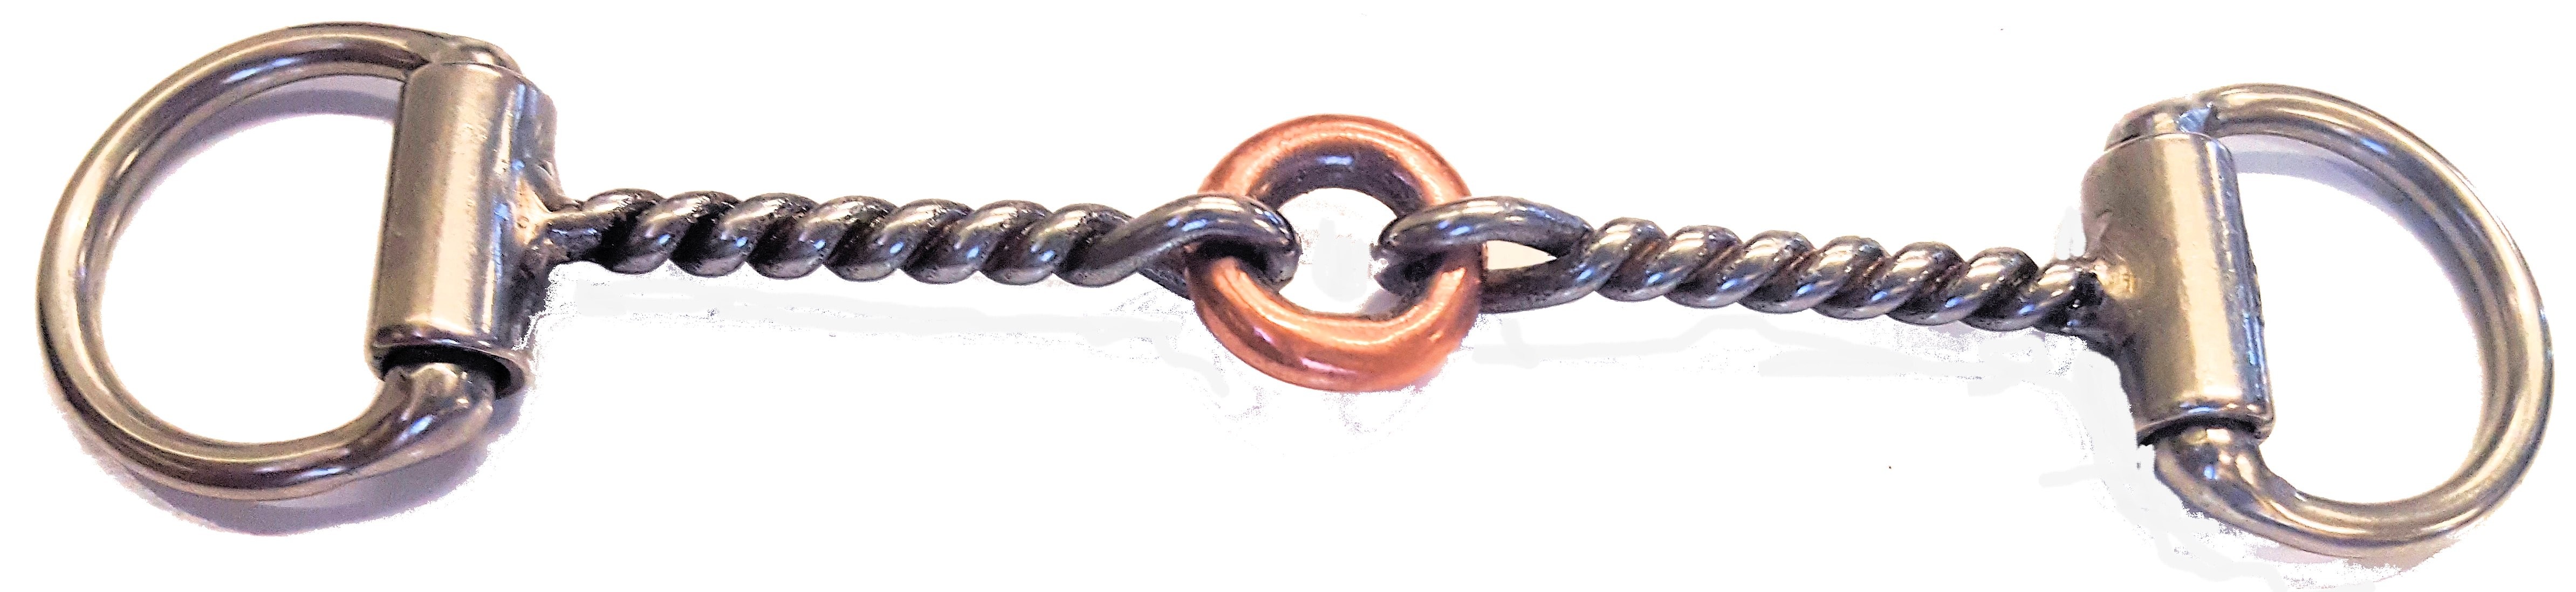 1/4" Twisted Wire with Copper Ring in Center